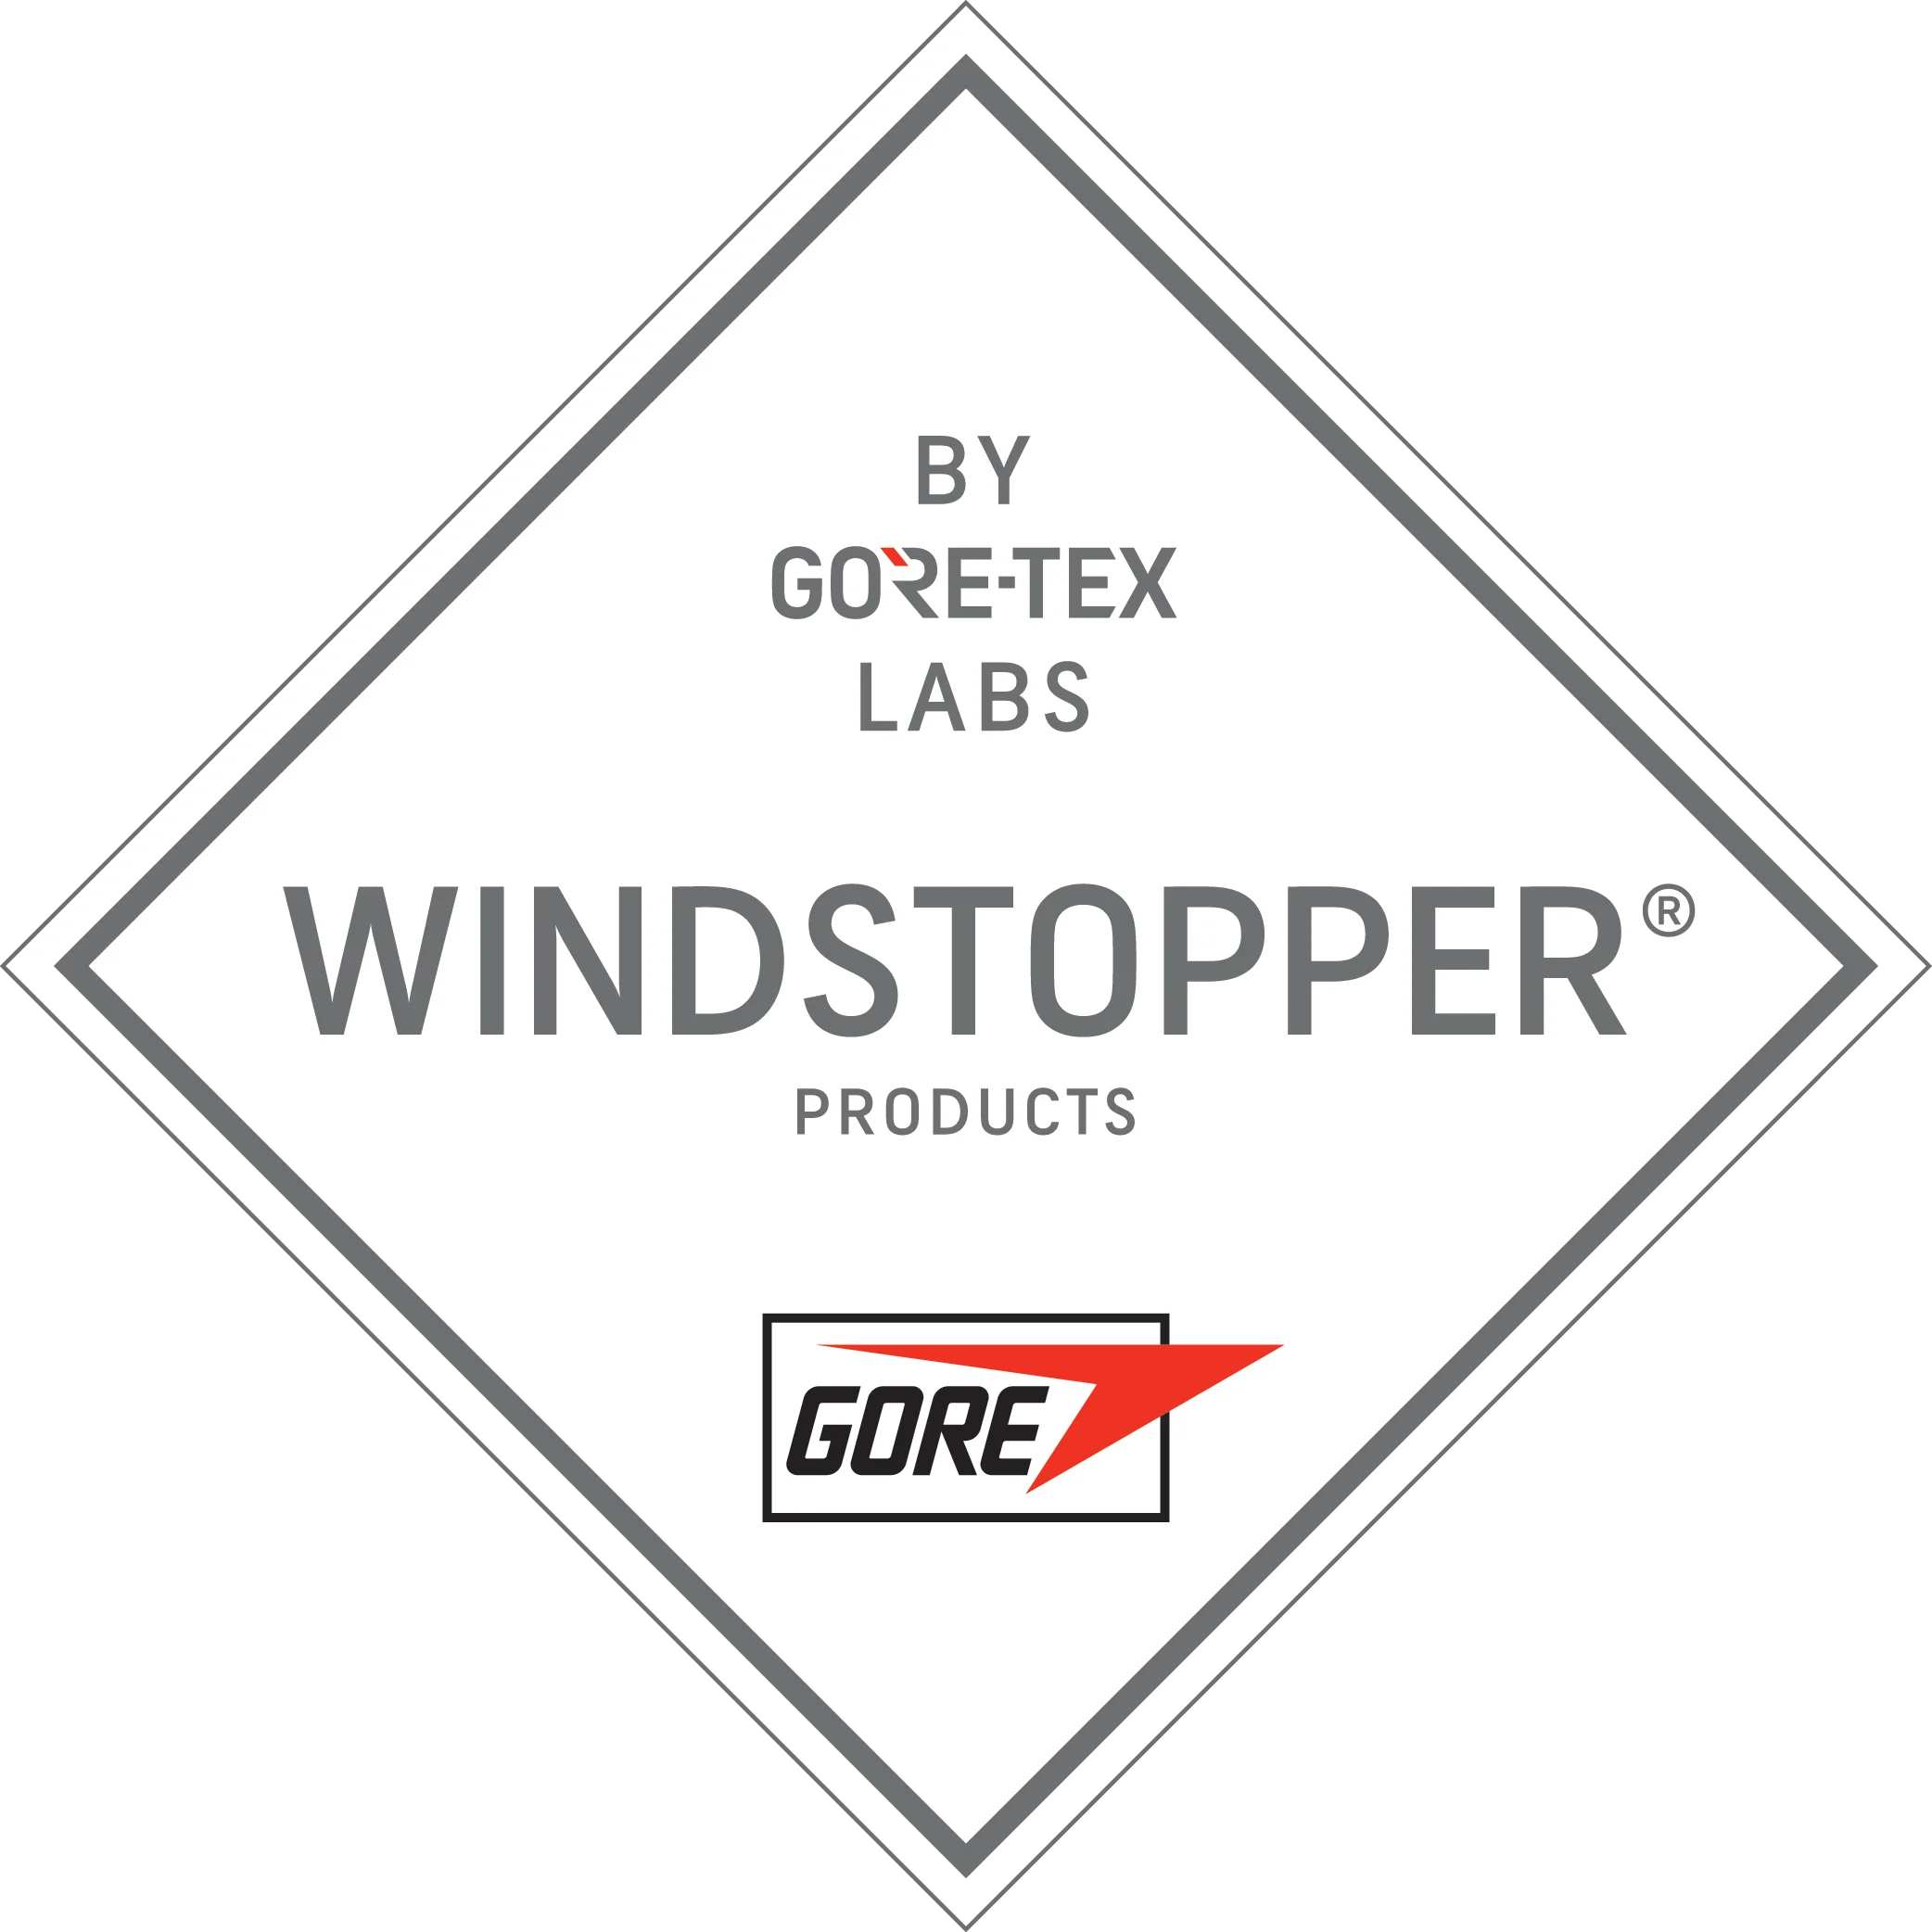 WINDSTOPPER® PRODUCTS BY GORE-TEX LABS